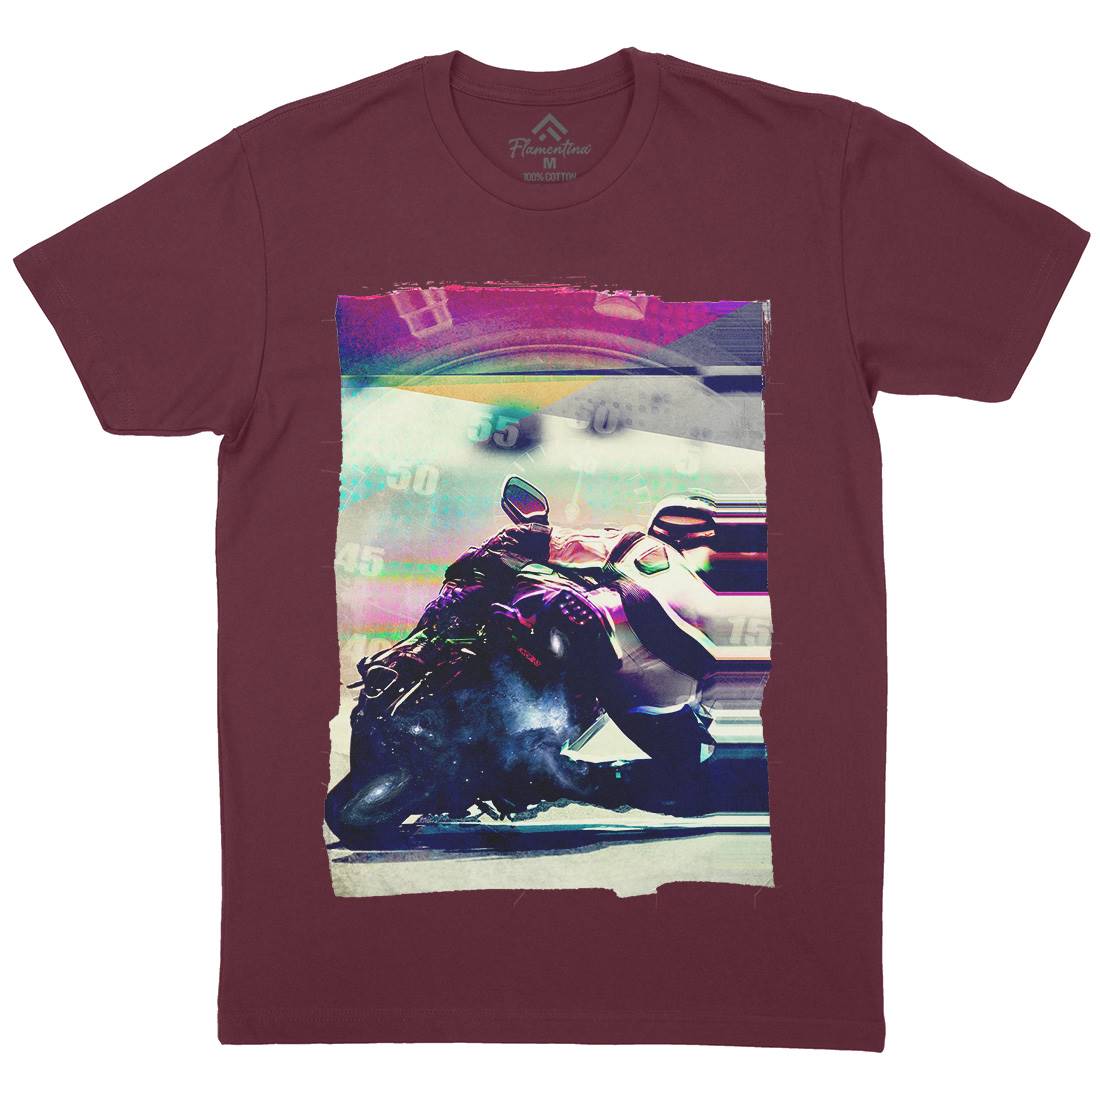 On Time Mens Crew Neck T-Shirt Motorcycles A891